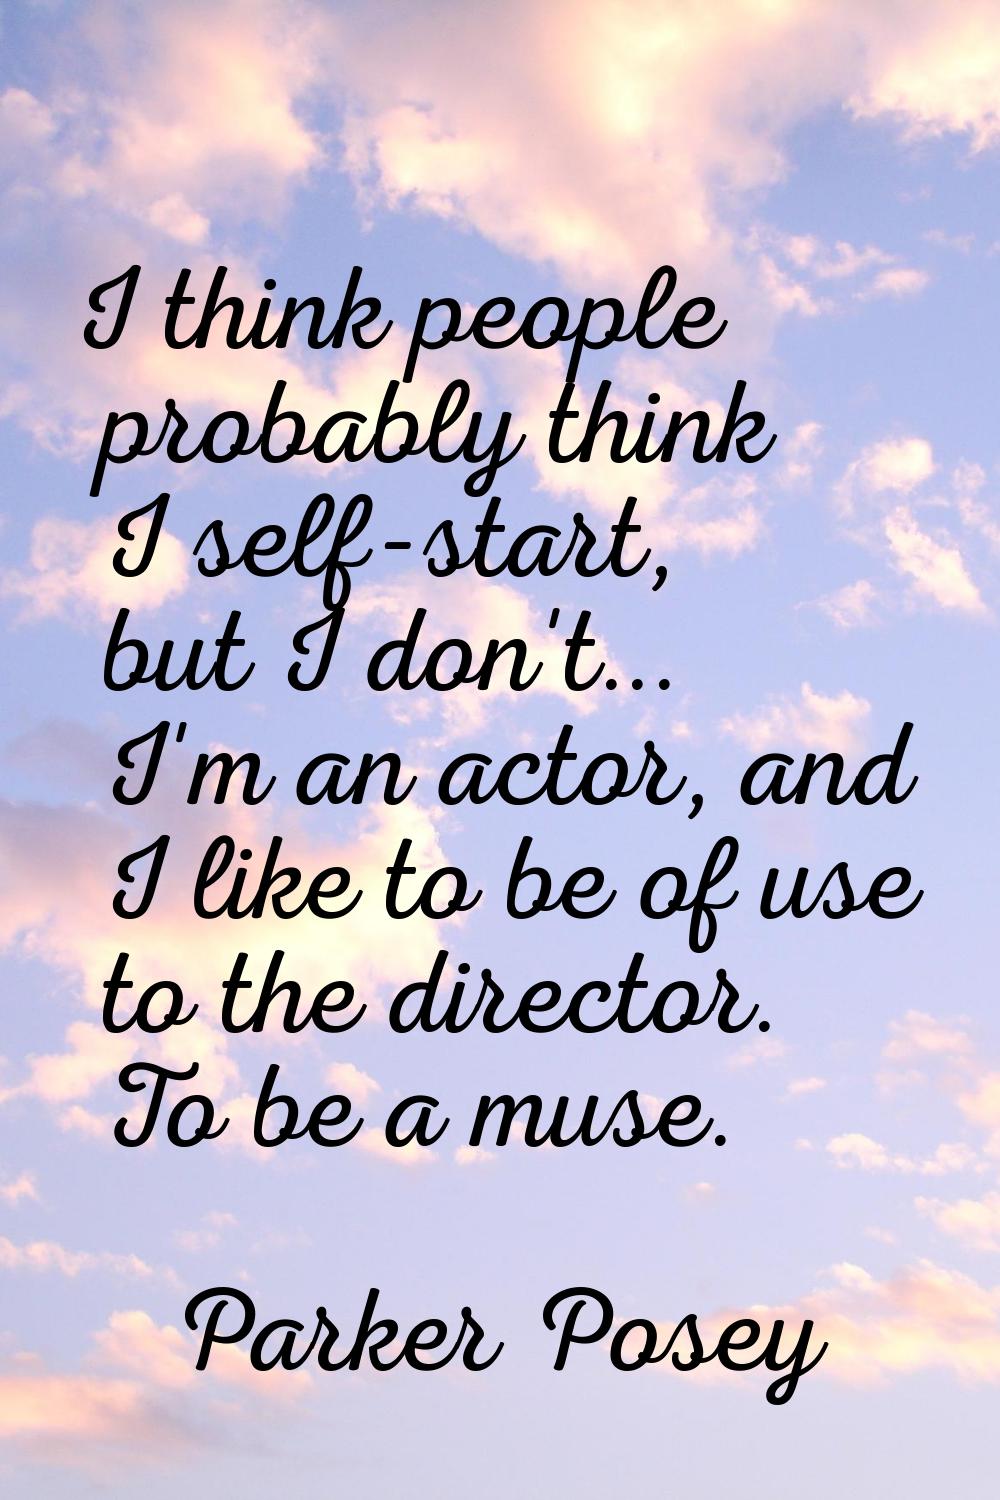 I think people probably think I self-start, but I don't... I'm an actor, and I like to be of use to